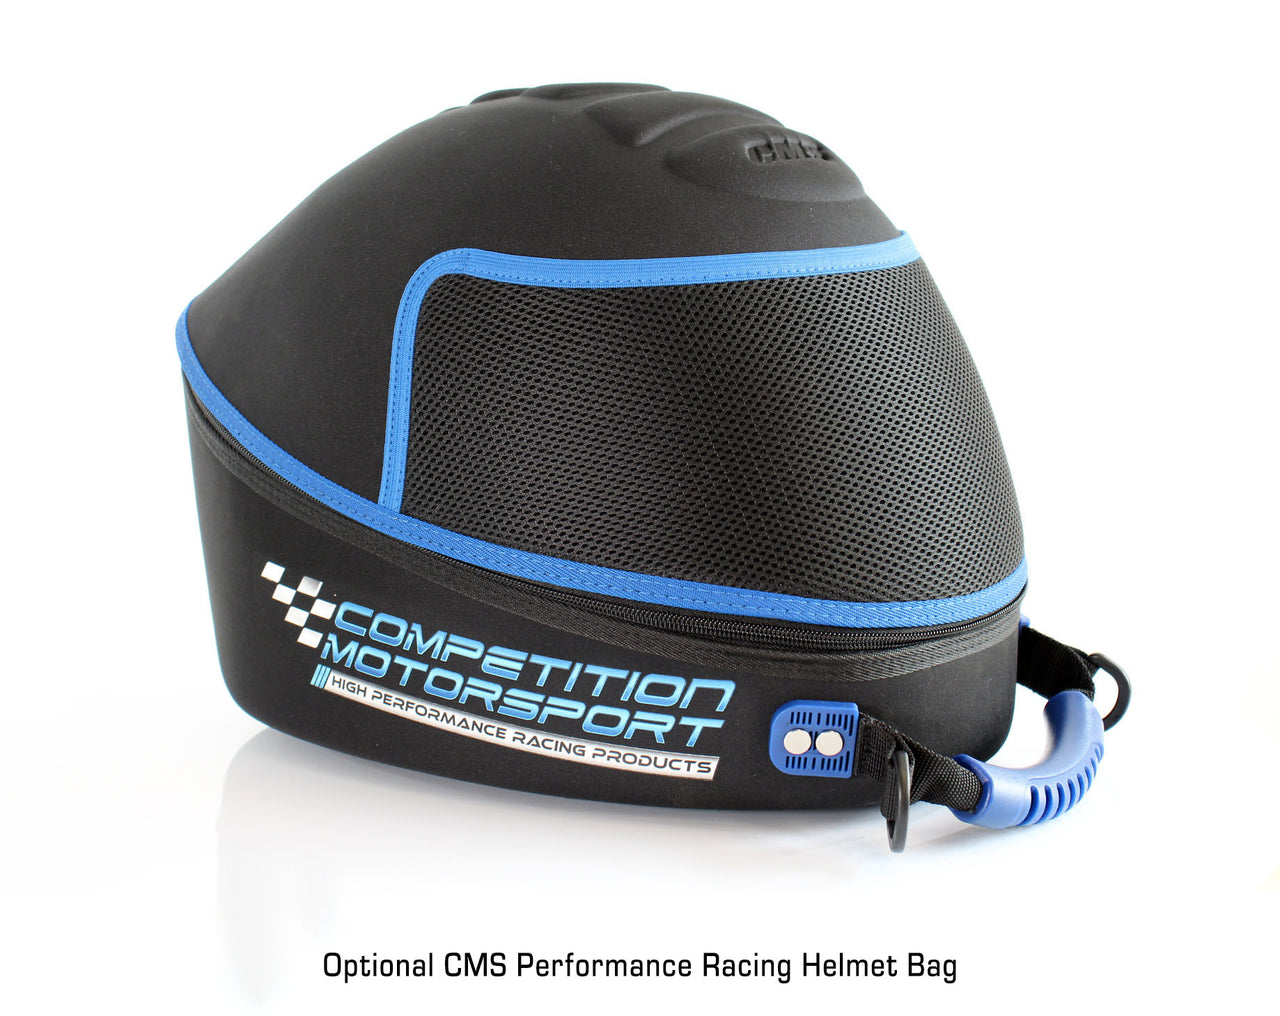 "Experience the Stilo ST5.1 GT Offshore Racing Helmet - Cutting-Edge Design"